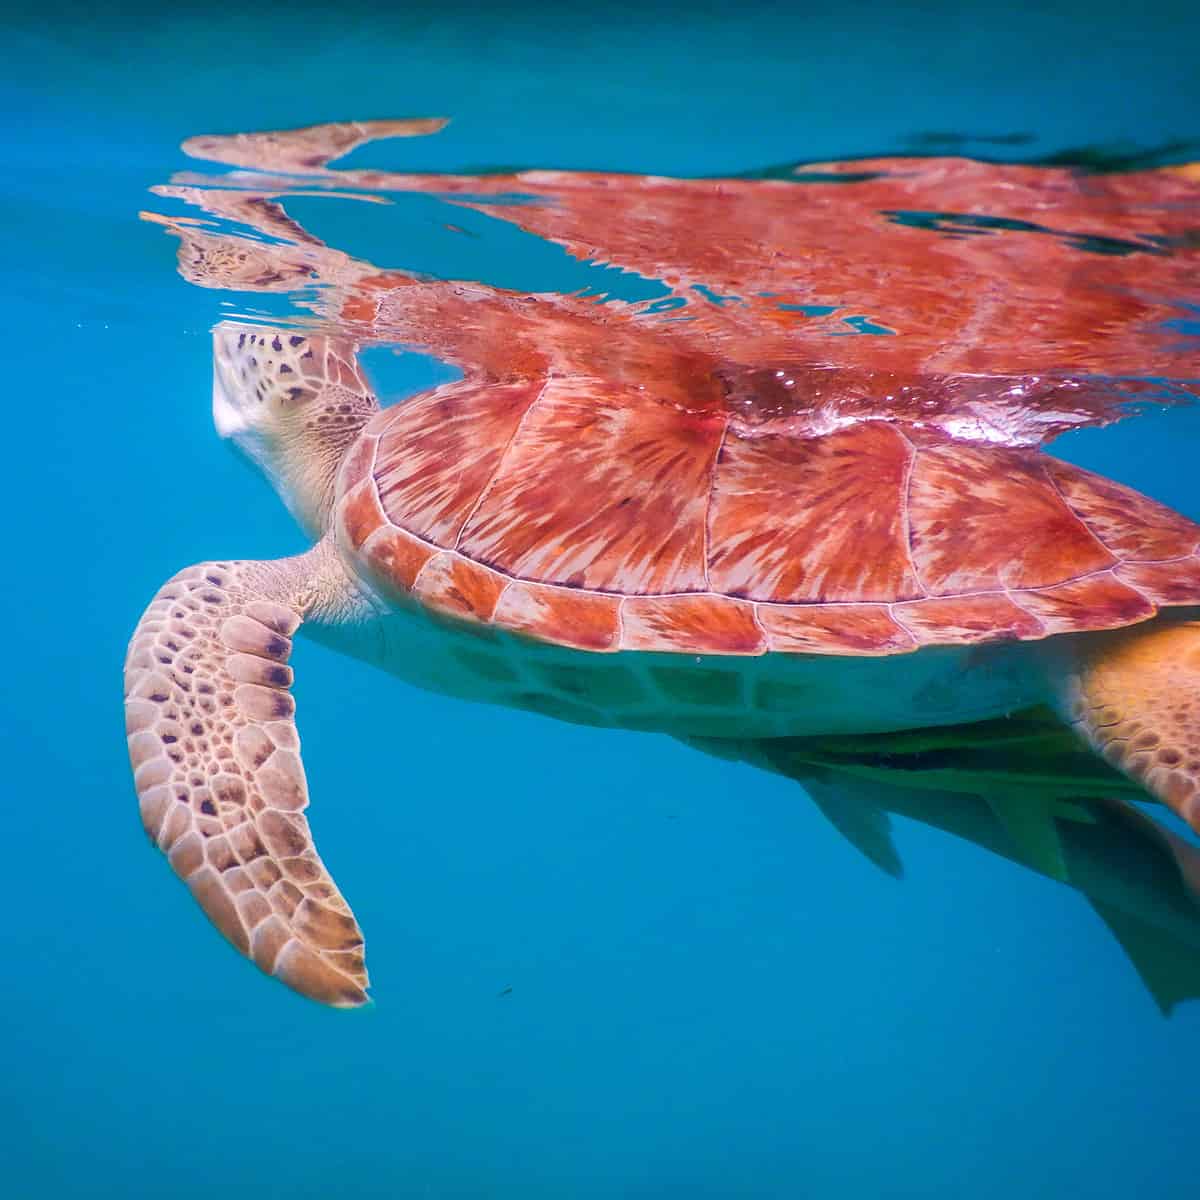 A turtle while snorkeling at Maho Beach